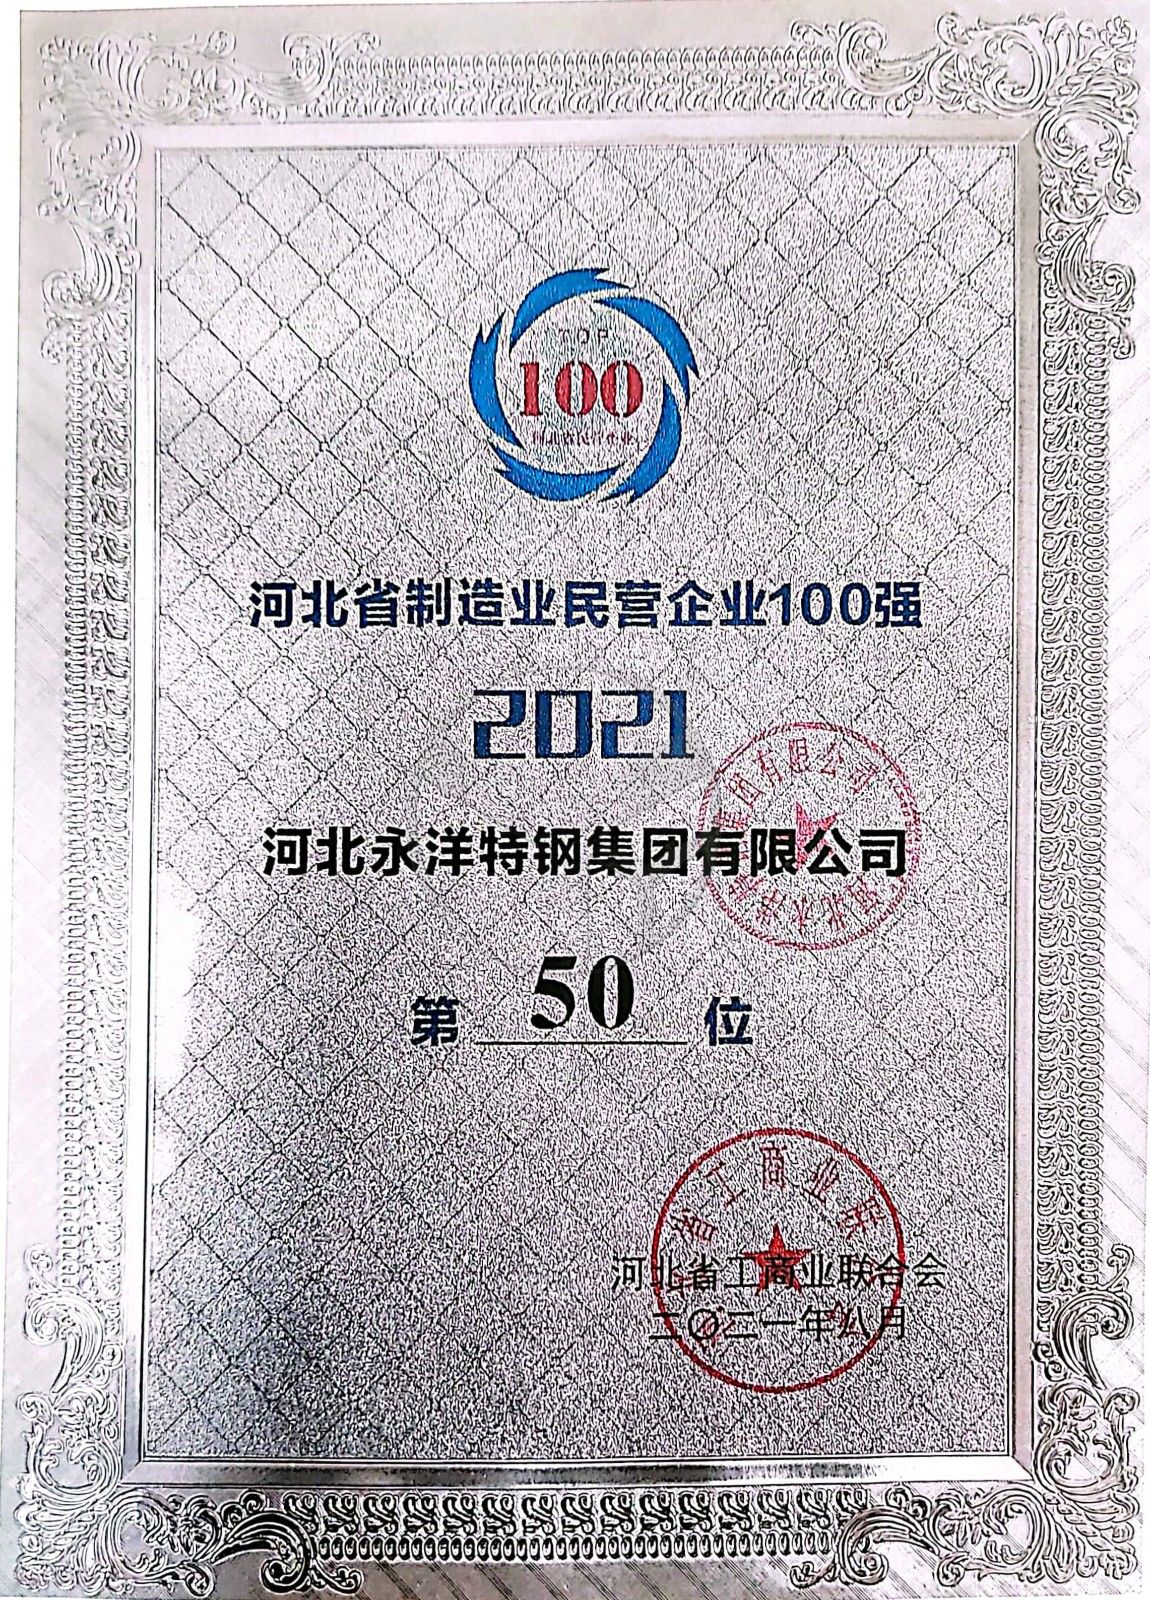 Top 50 Enterprise of Heibei Province